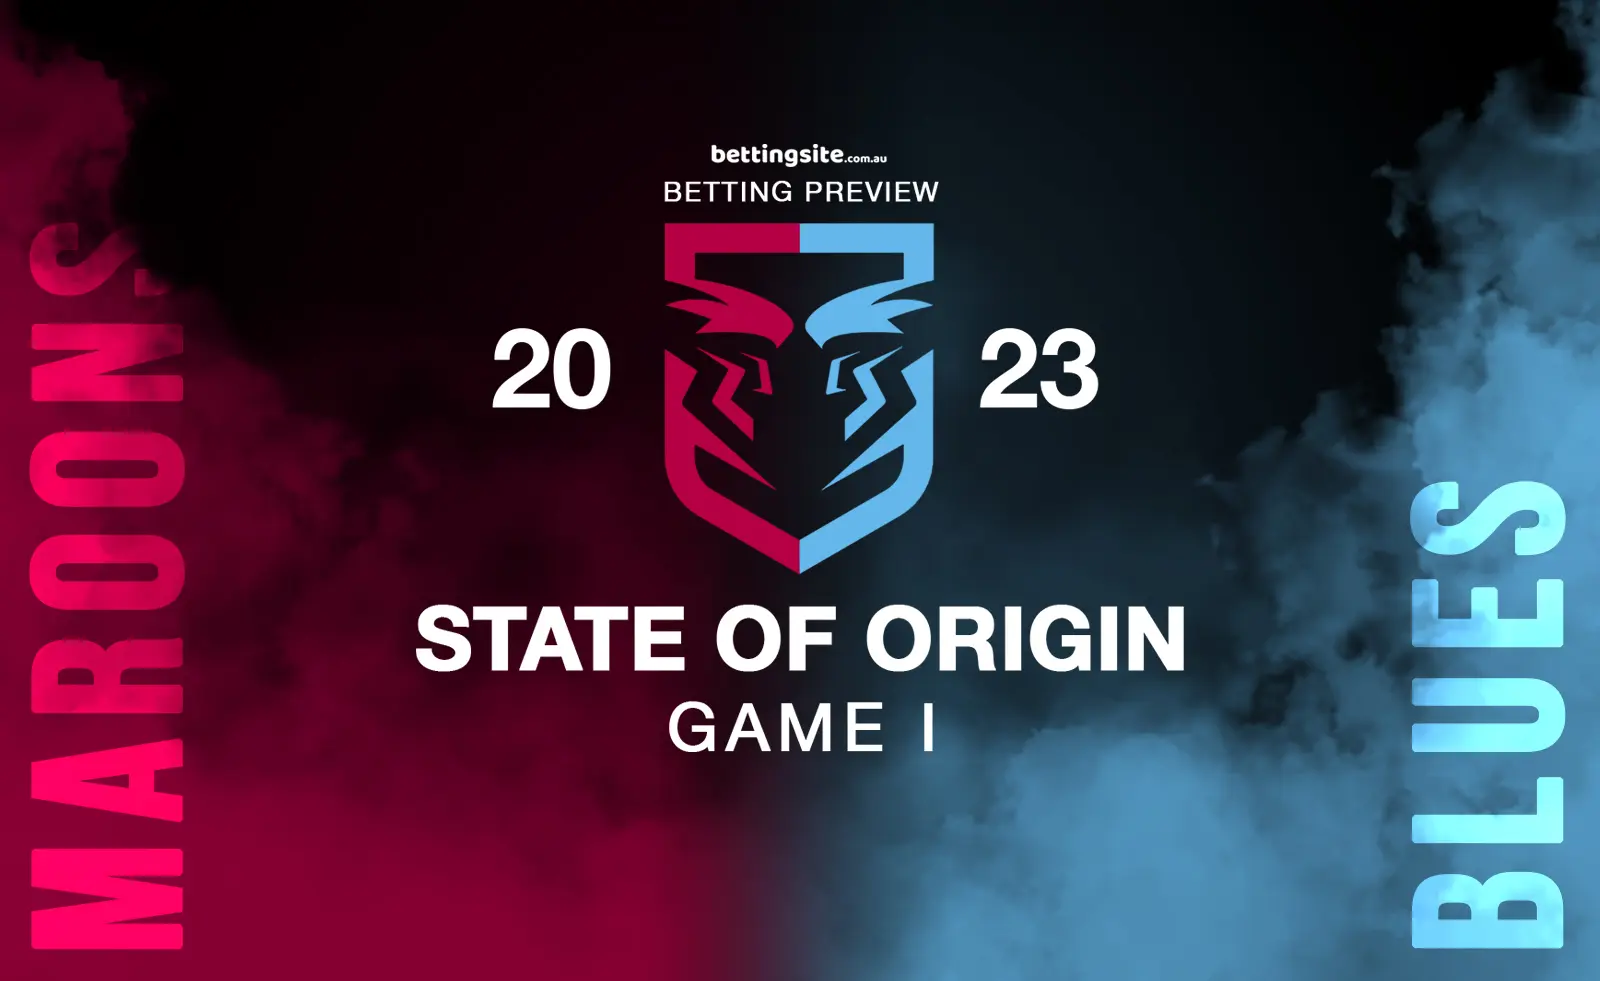 State of Origin Game 1 betting tips